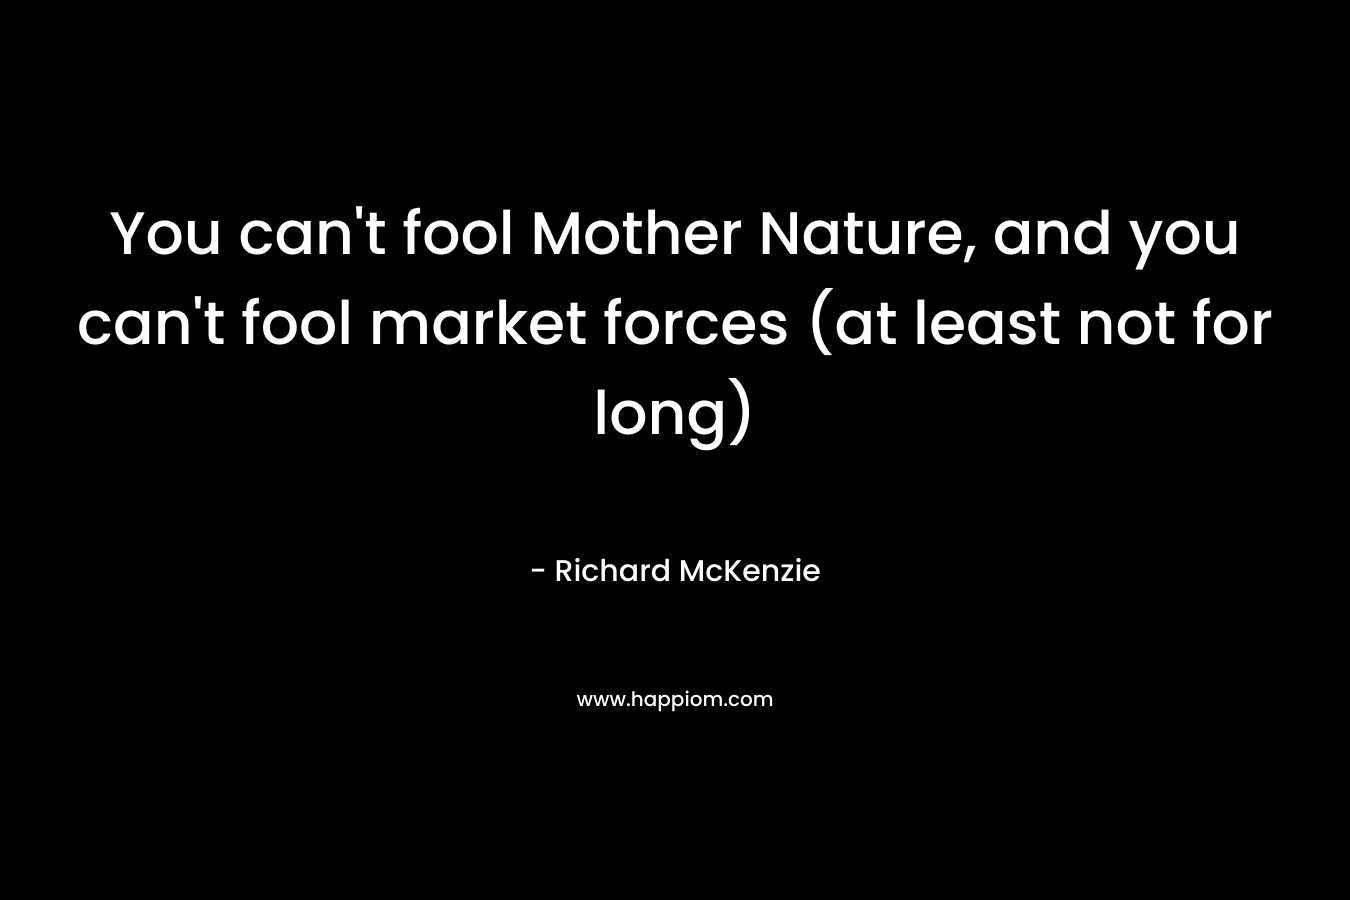 You can’t fool Mother Nature, and you can’t fool market forces (at least not for long) – Richard McKenzie